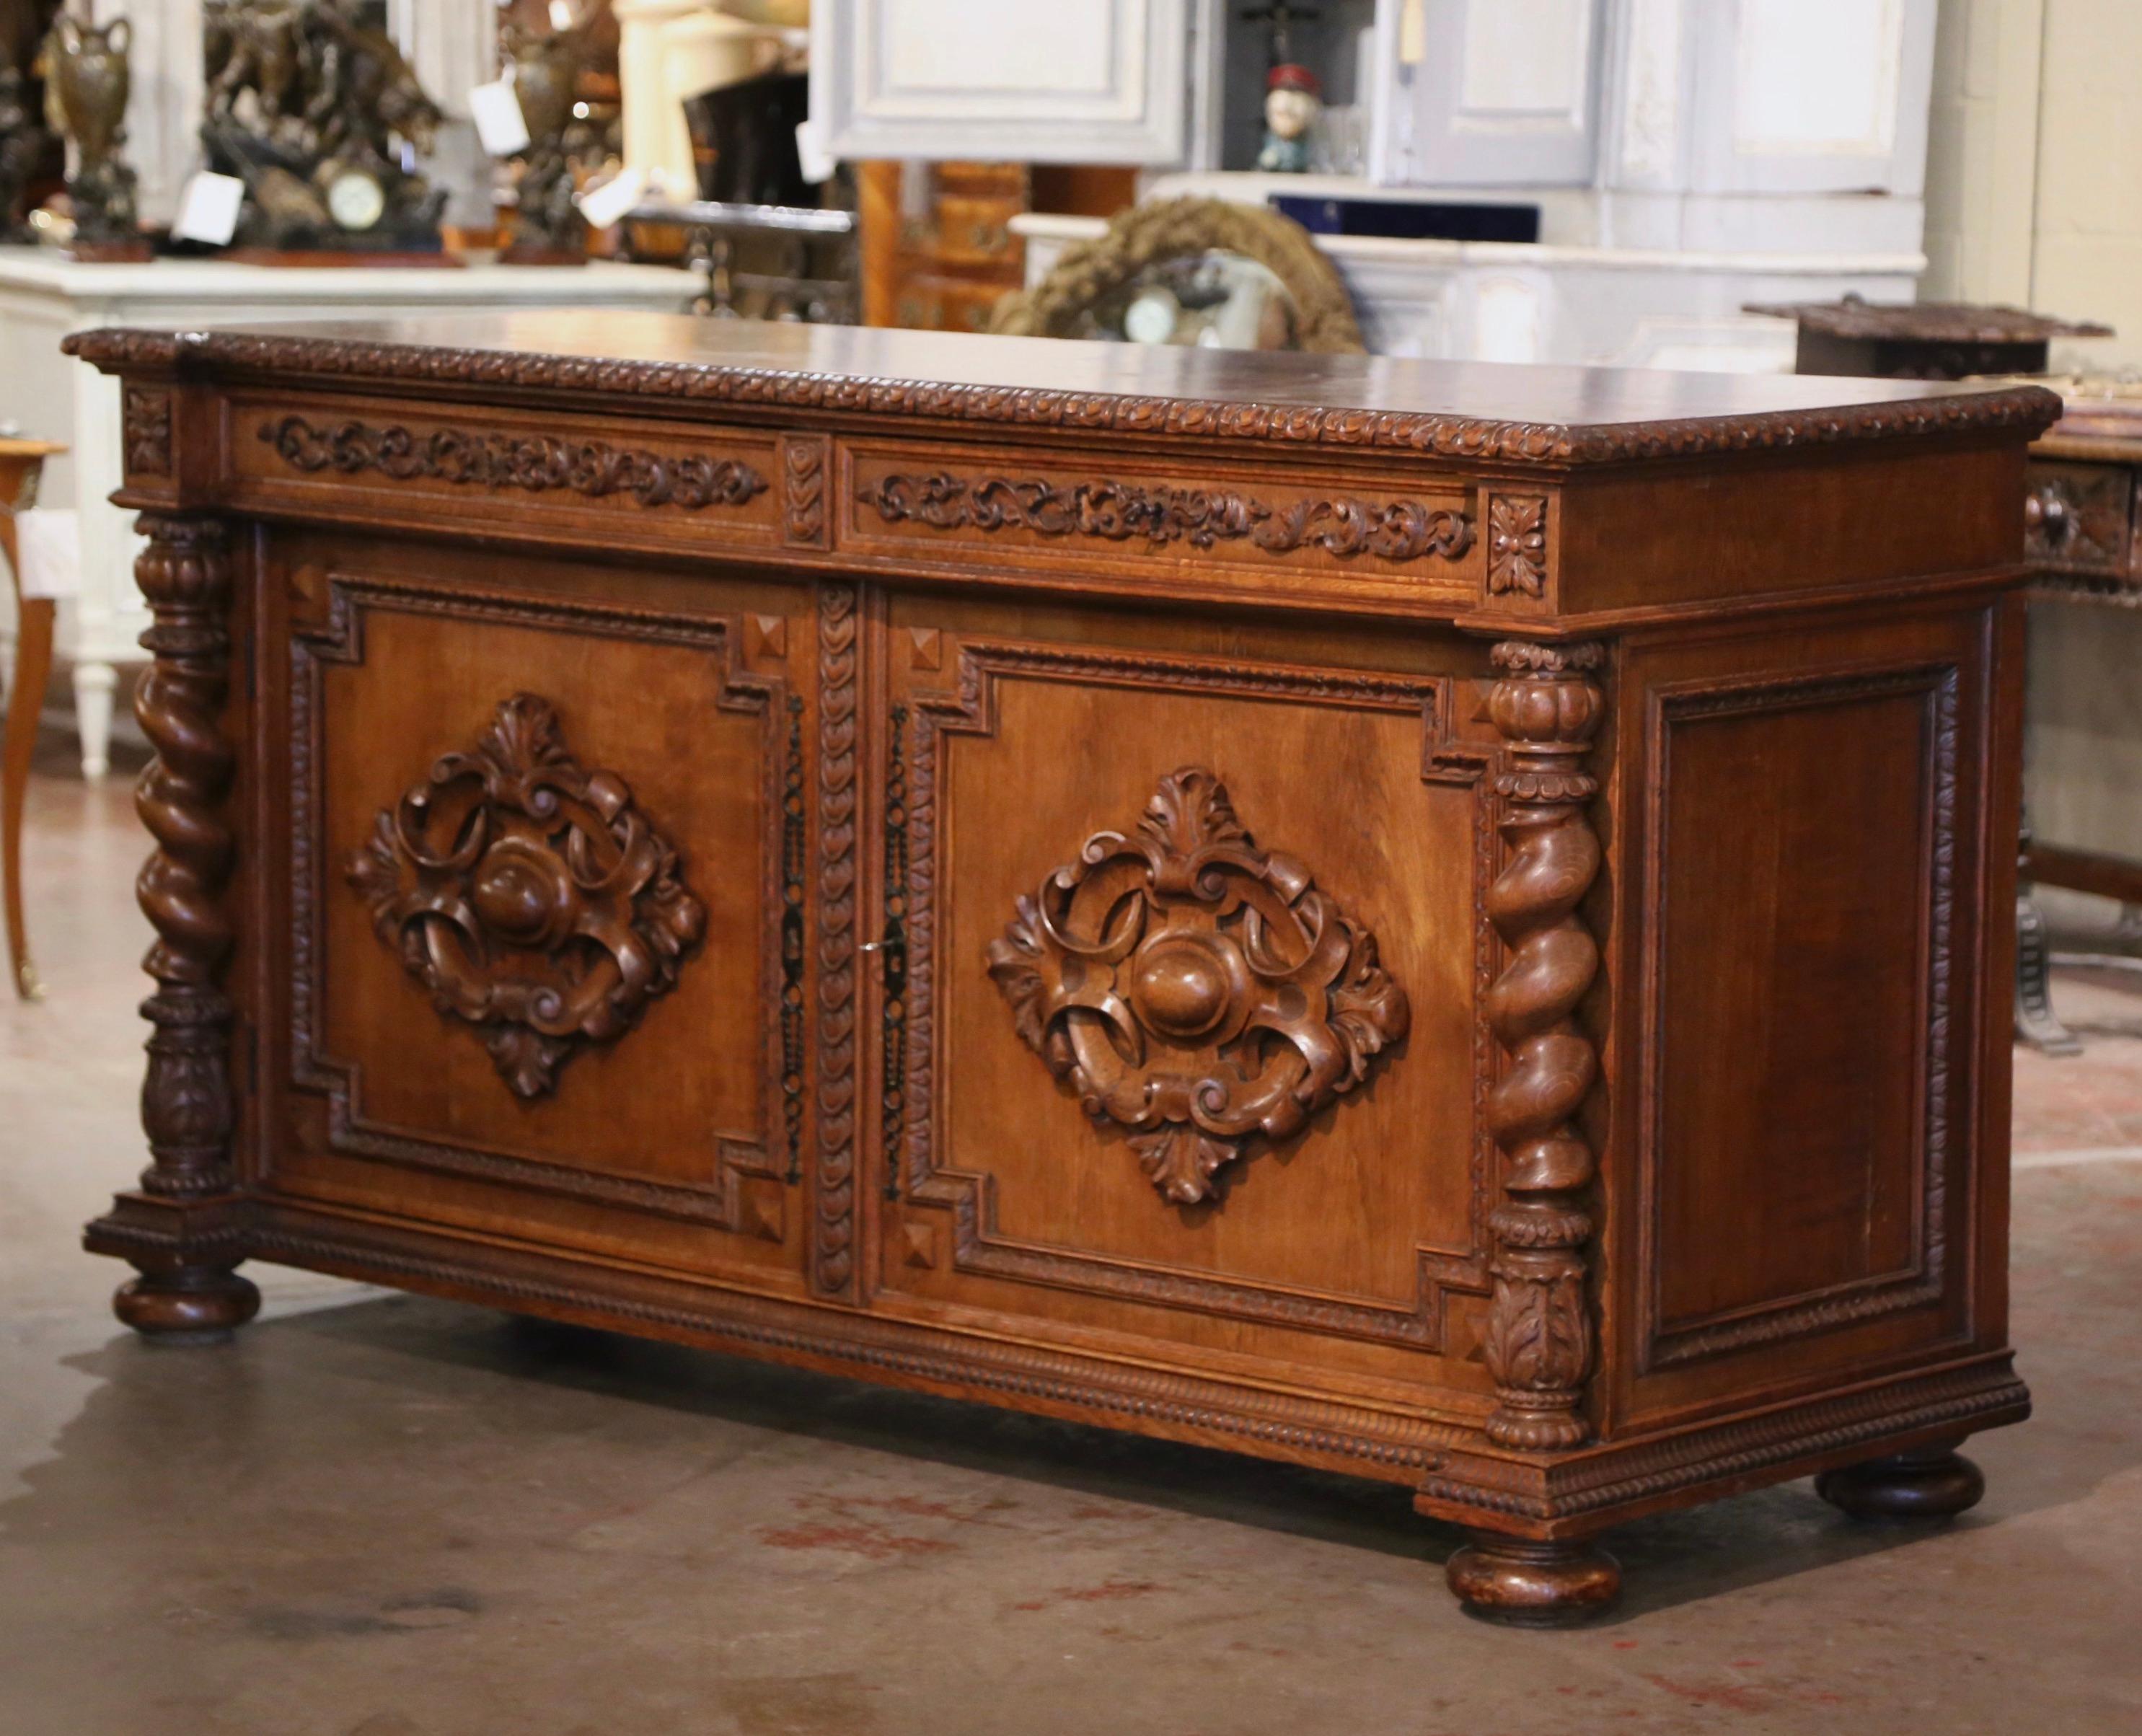 This elegant antique buffet was crafted in southwest France, circa 1850. Built of oak, the cabinet stands on front bun feet over a intricately carved bottom plinth. The cabinet features a pair of doors decorated with high relief crest motifs on